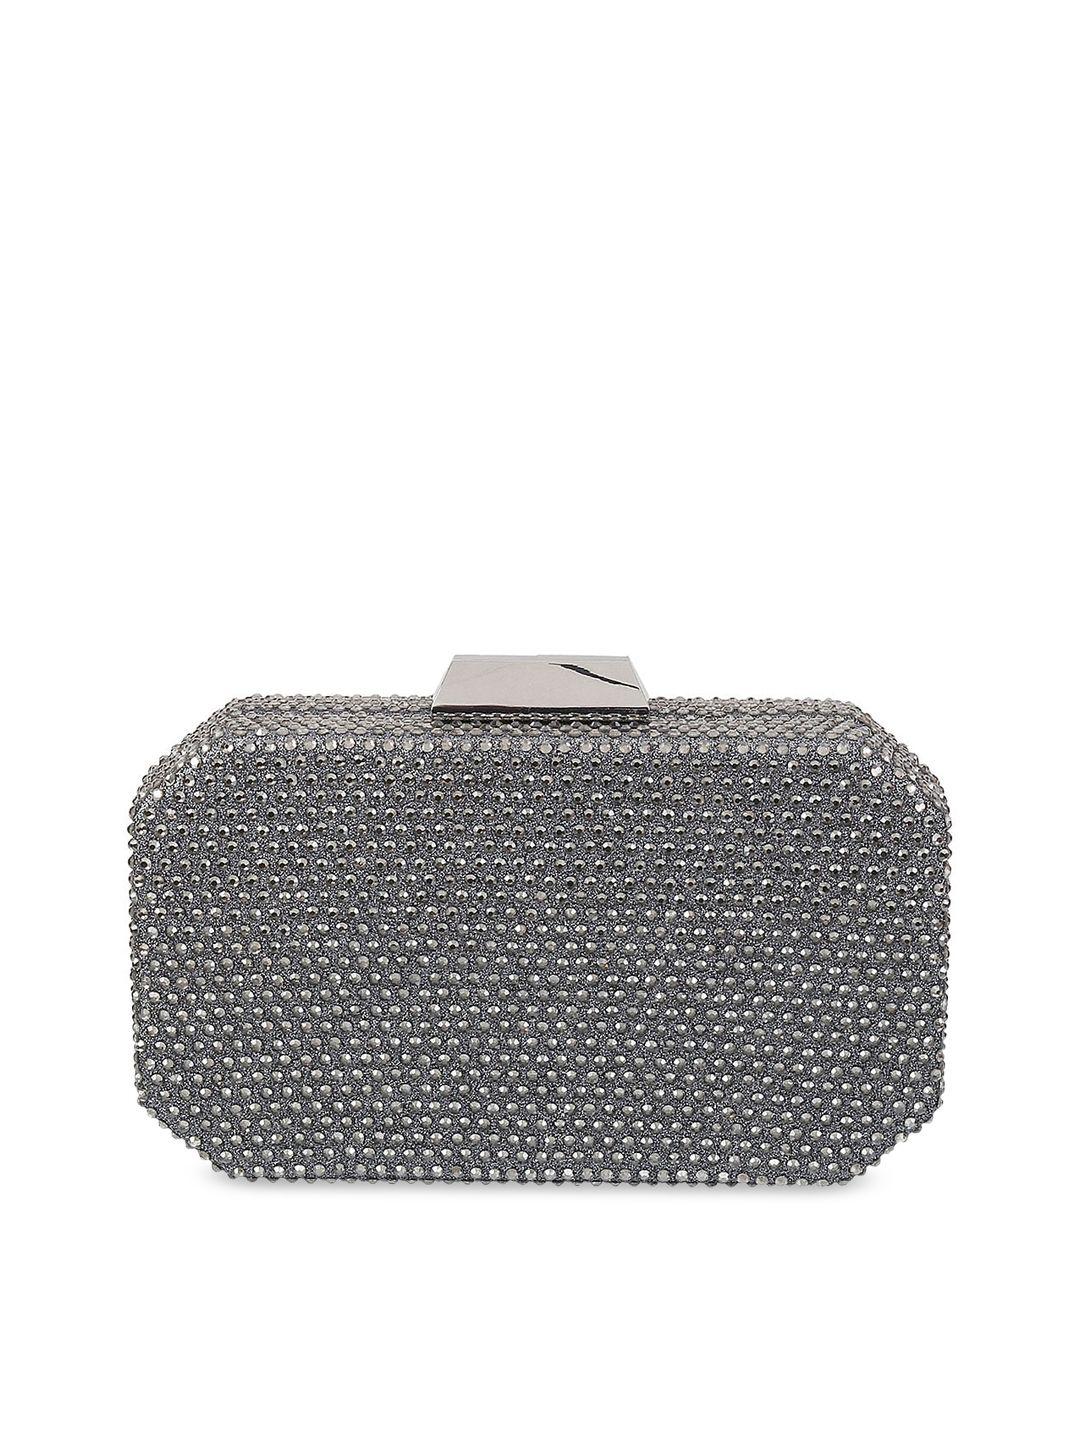 metro grey & silver-toned embellished clutch